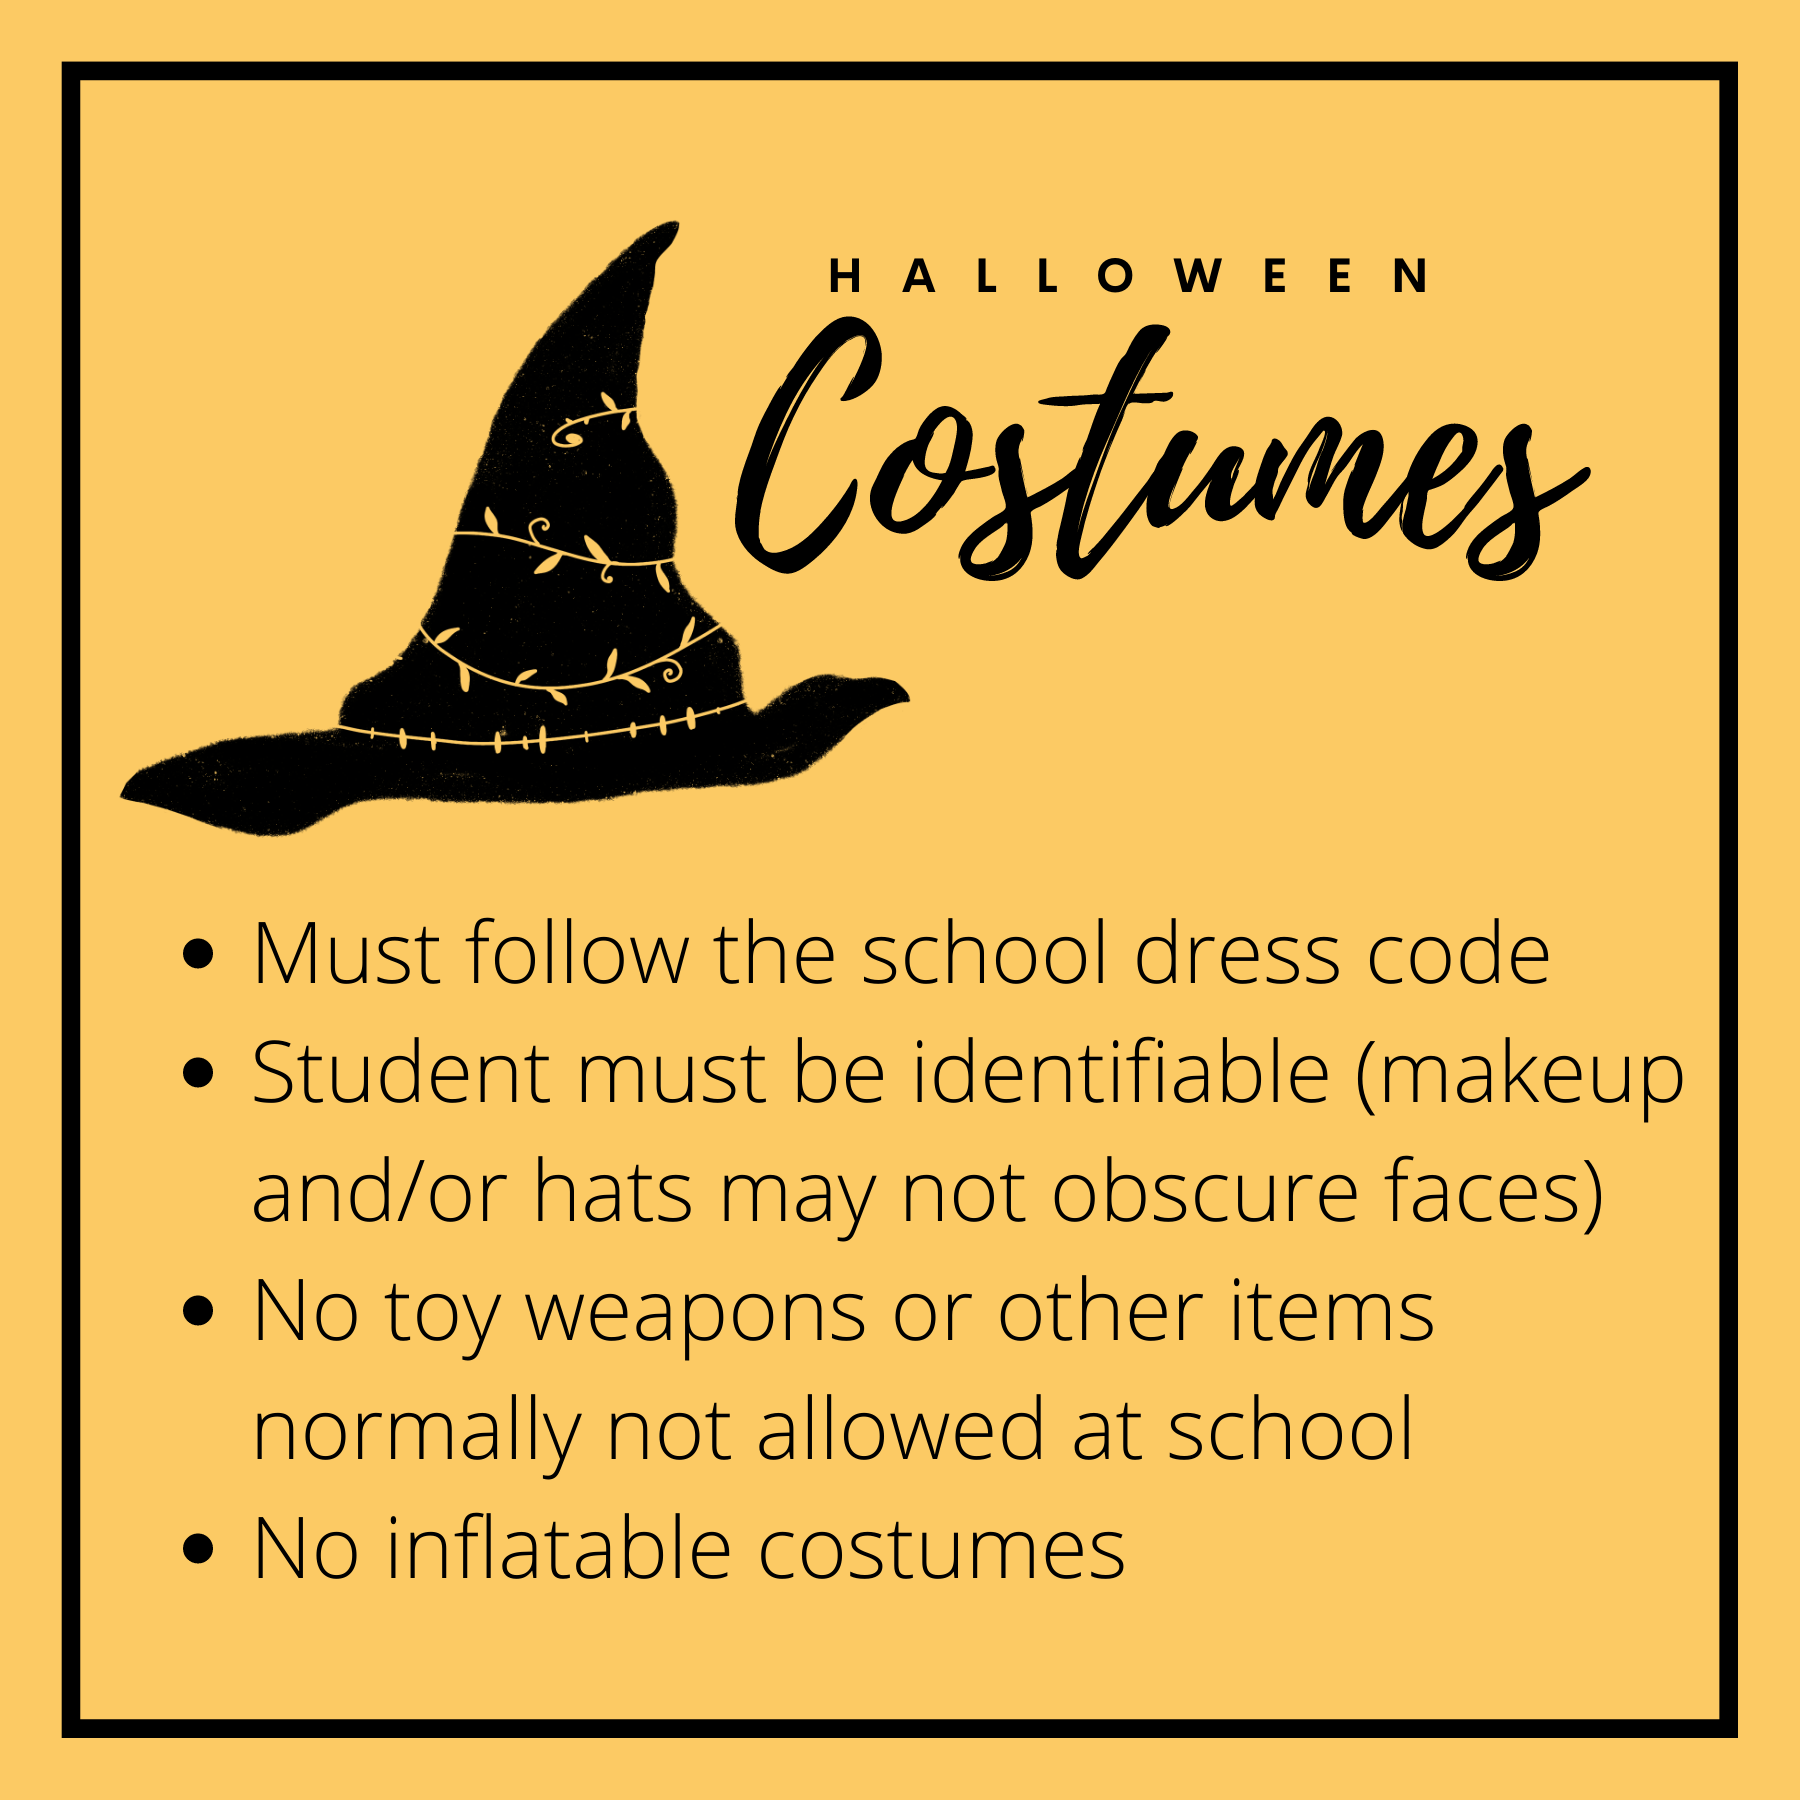 Halloween costumes must follow the school dress code. Students must be identifiable (nothing covering faces). No toy weapons or other items normally not allowed at school. No inflatable costumes.